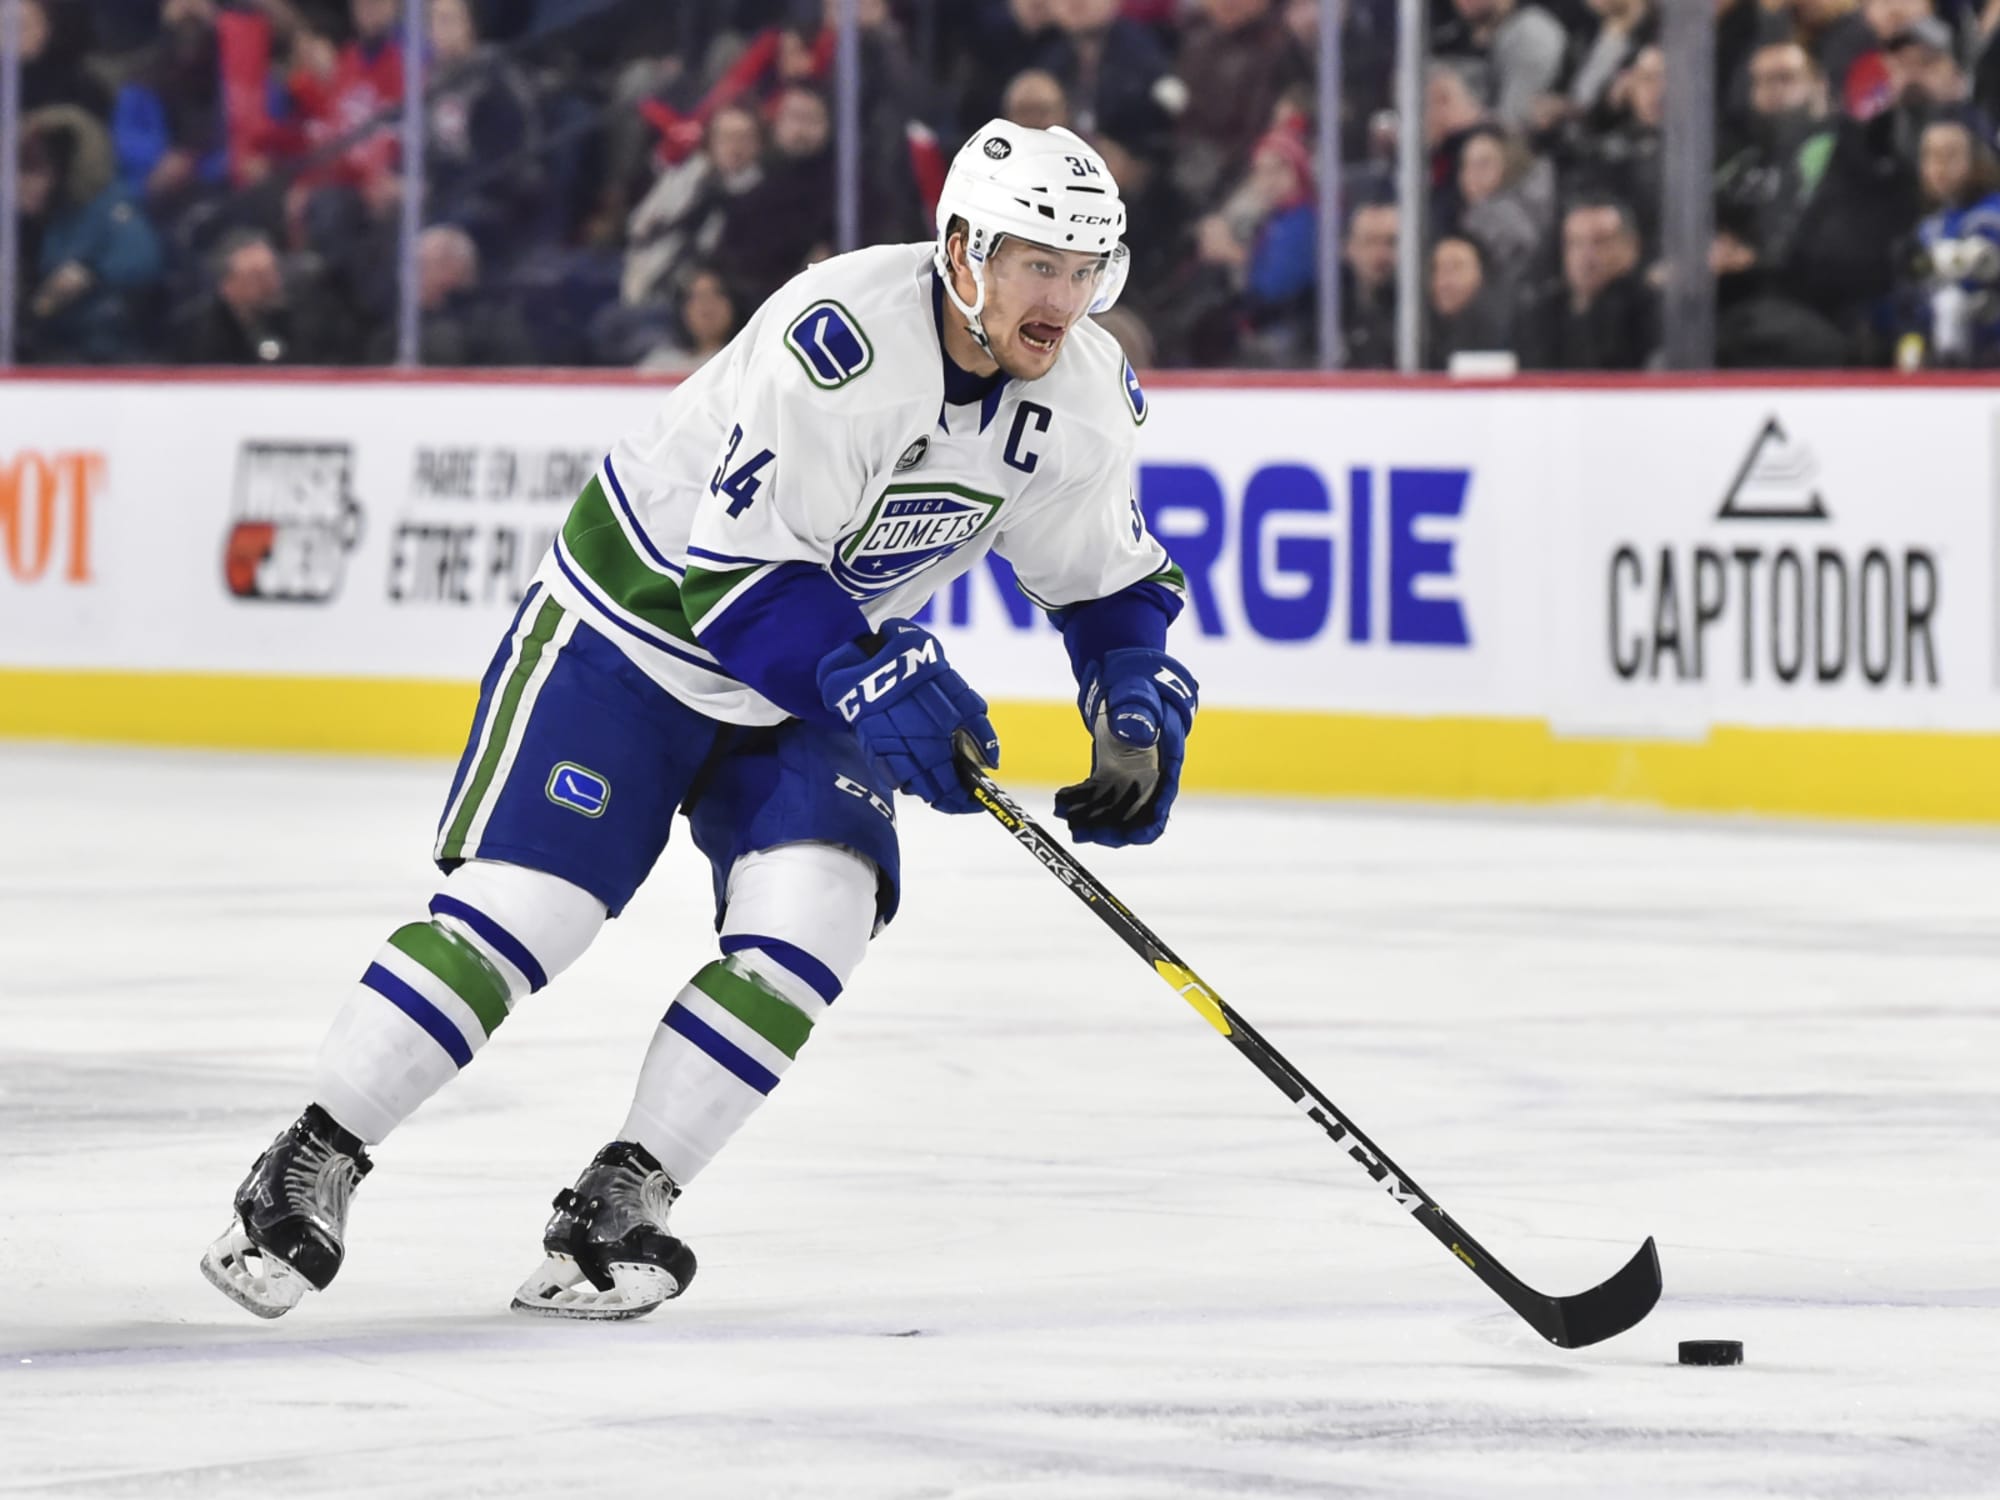 It's a big deal around here': Excitement growing for Canucks' AHL affiliate  to arrive in Abbotsford